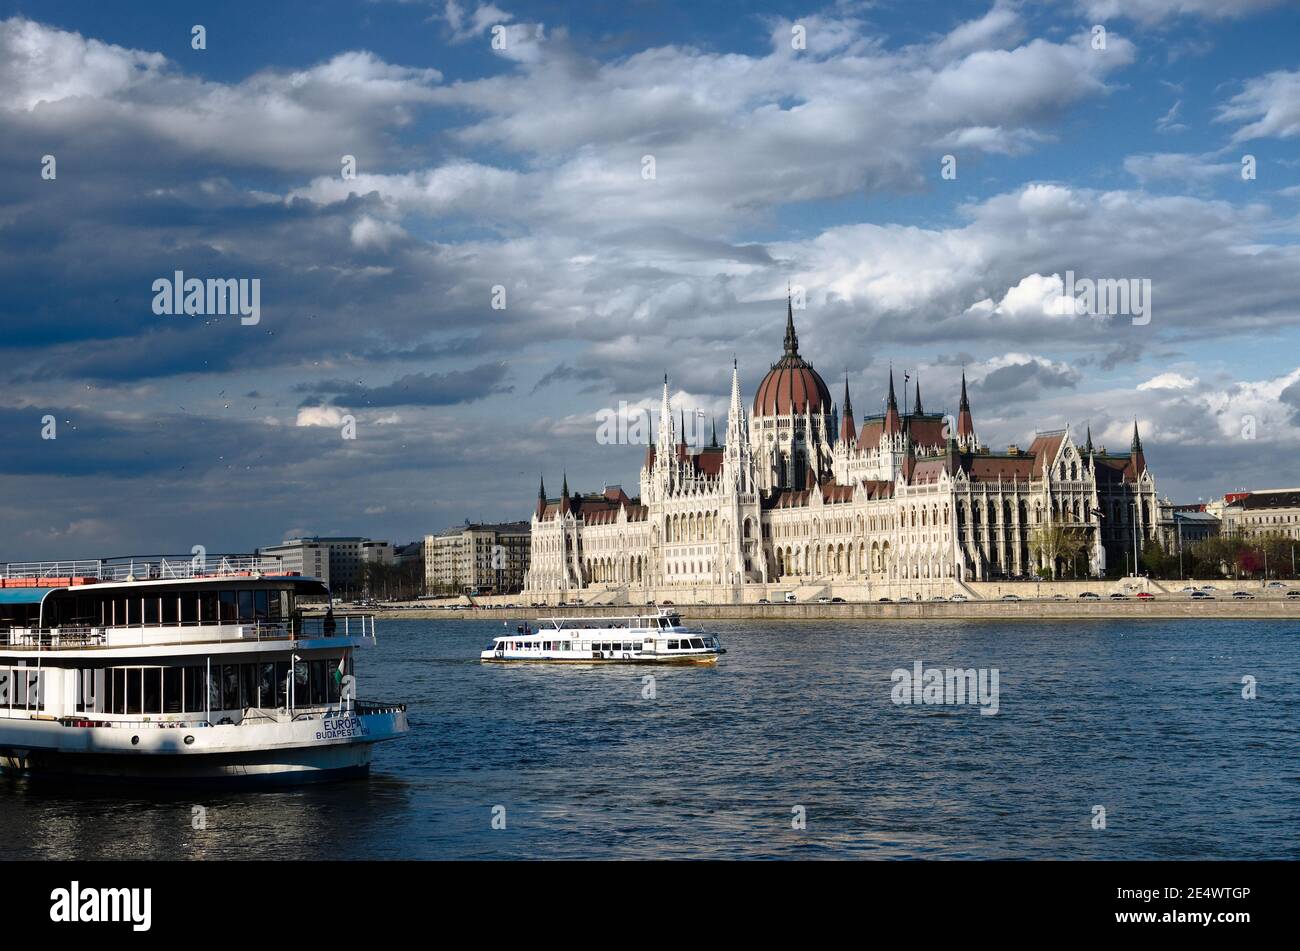 Budapest, Hungary - April 04, 2012: tourist boat called Europa Budapest, Hu is moored on the Danube River and another is cruising in front of the Hung Stock Photo